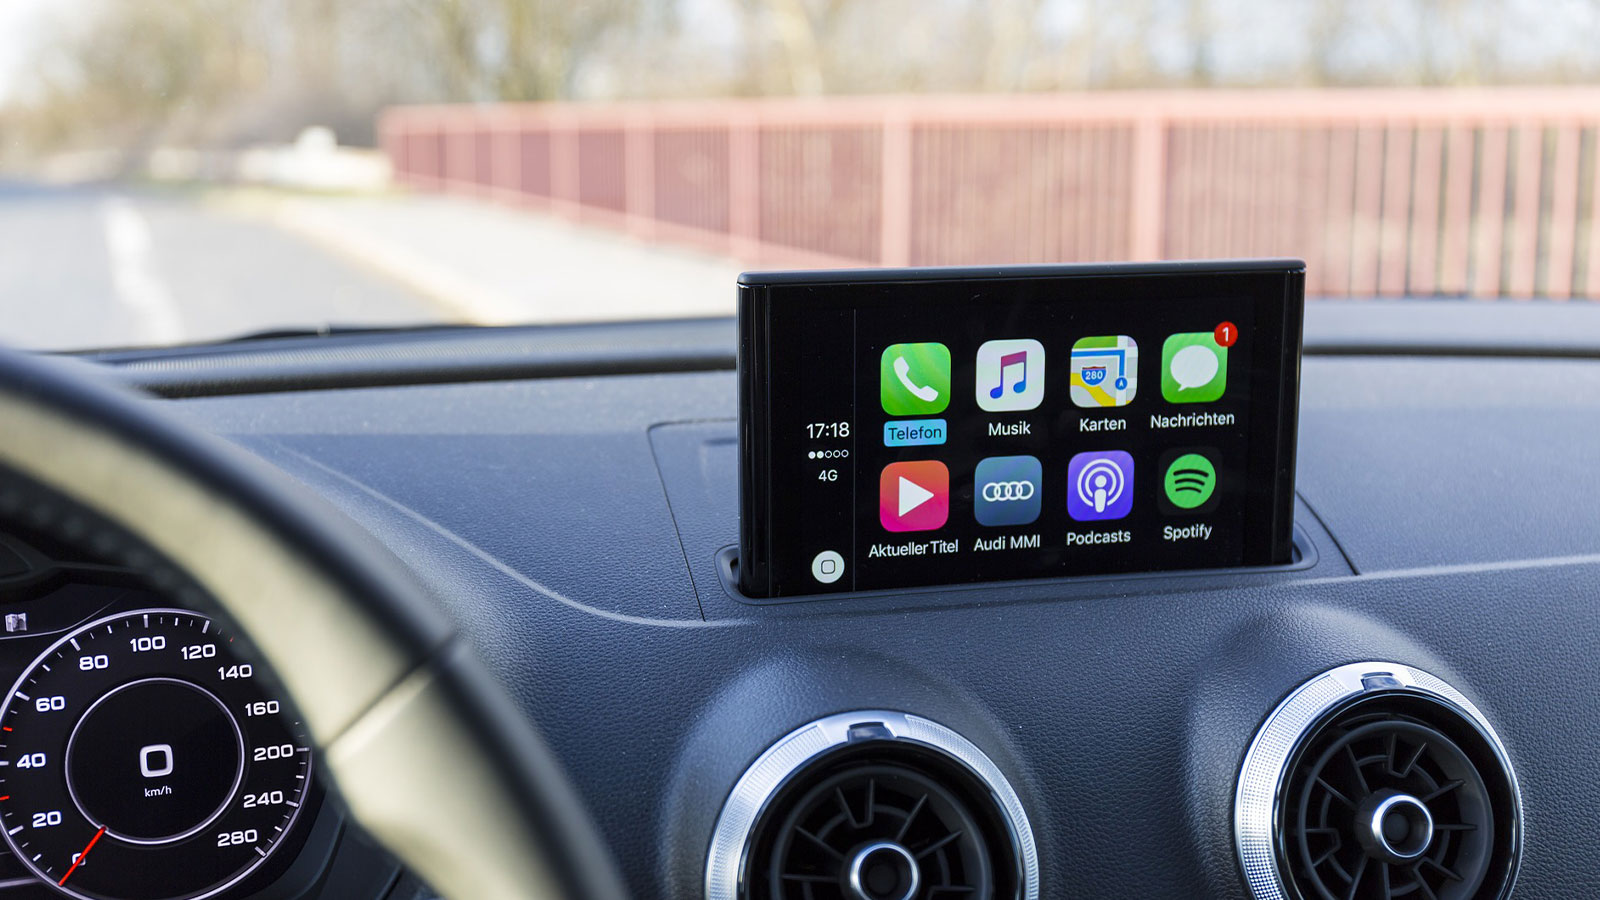 From pull to push: Why Apple CarPlay and Android Auto drive automotive User Experience to a new level